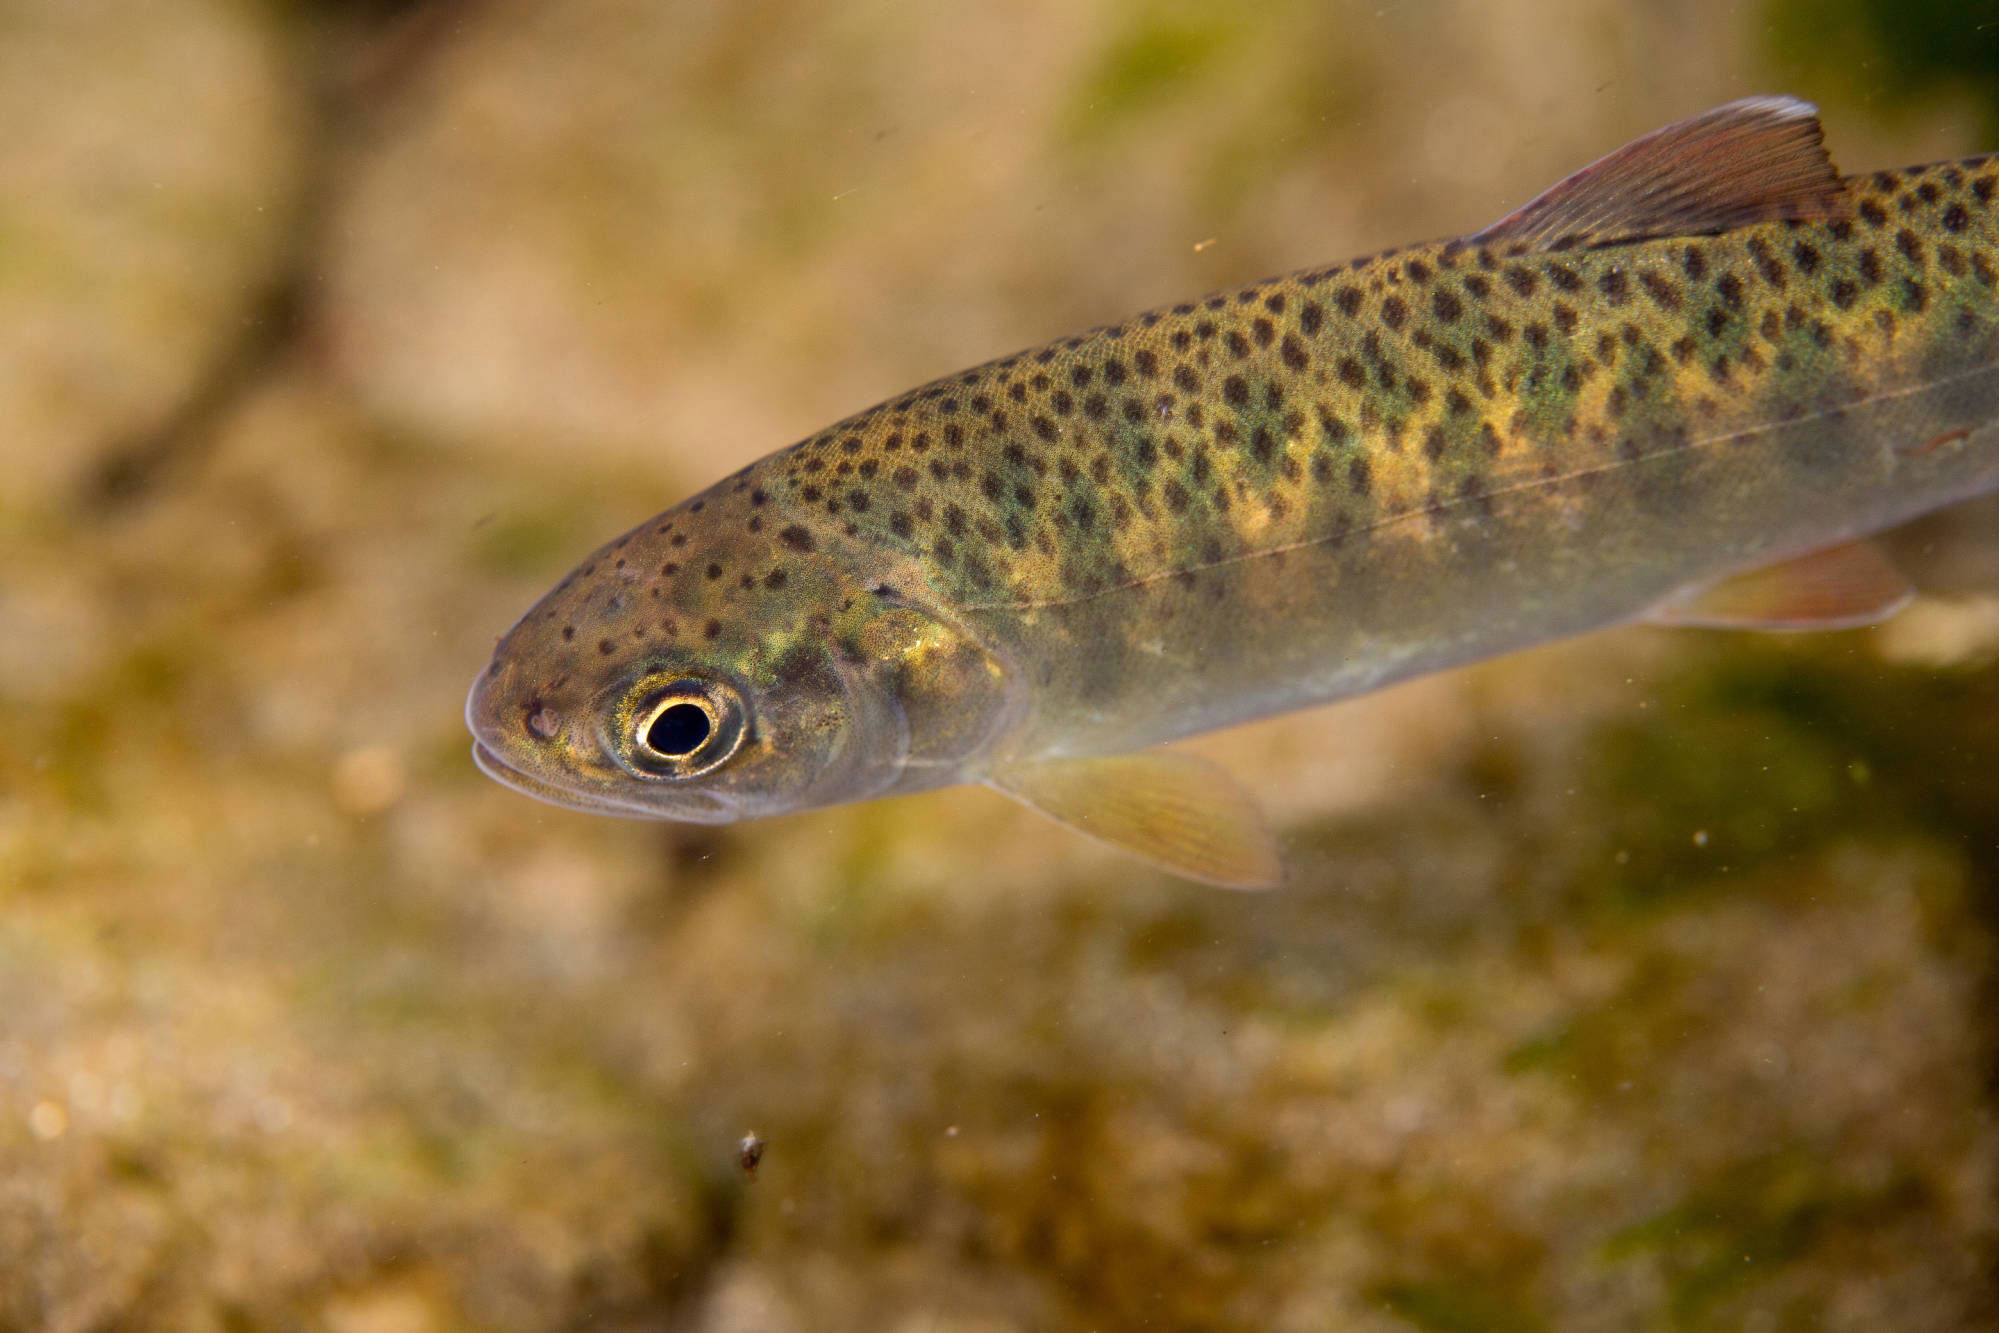 Neosho National Fish Hatchery - Juvenile trout are sometimes